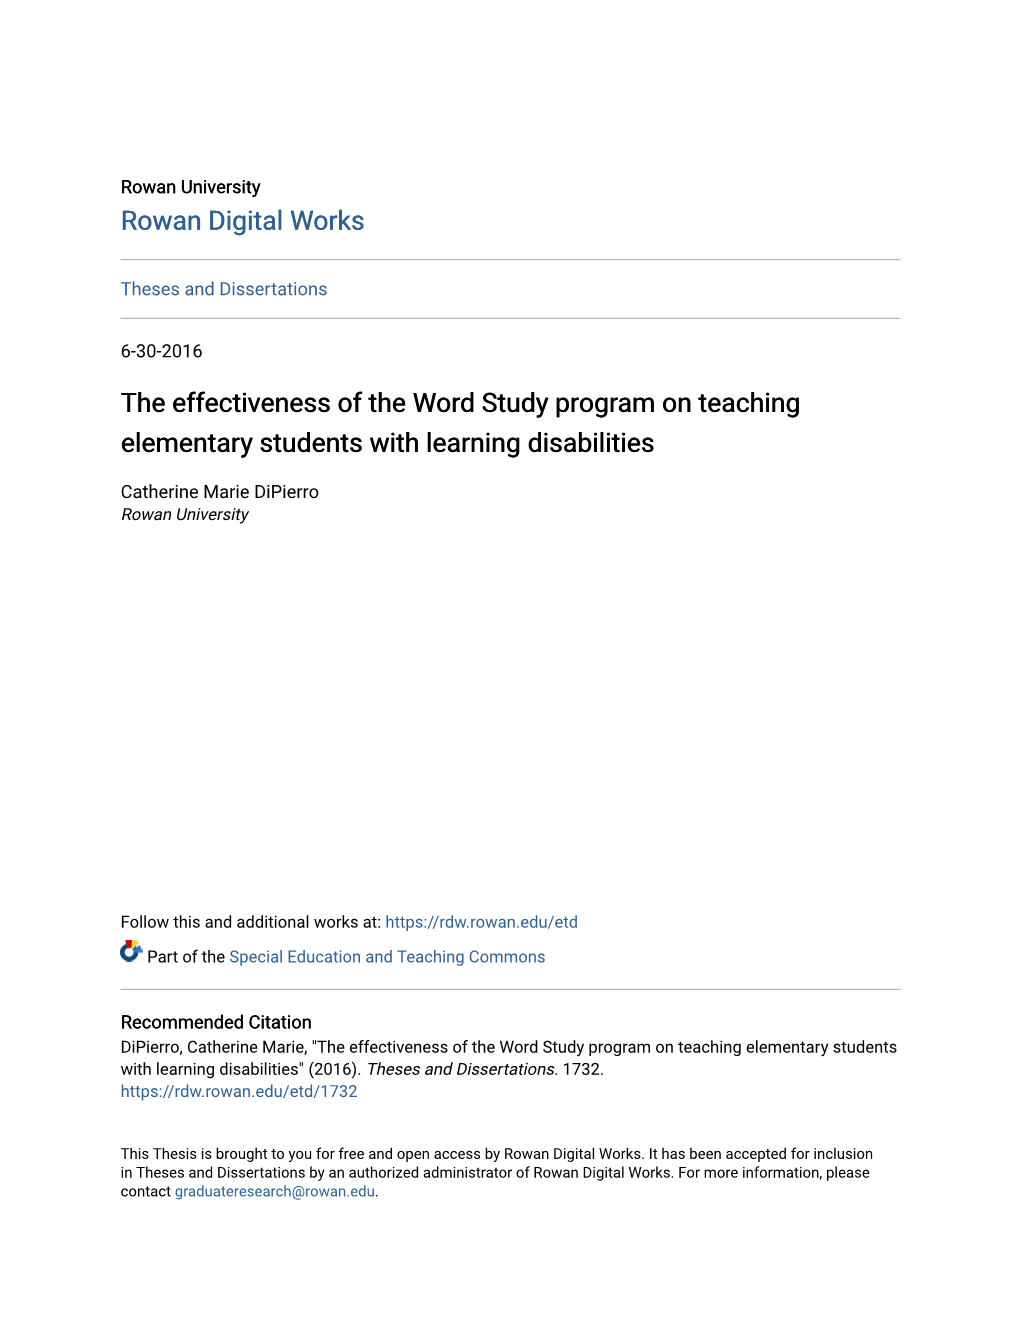 The Effectiveness of the Word Study Program on Teaching Elementary Students with Learning Disabilities